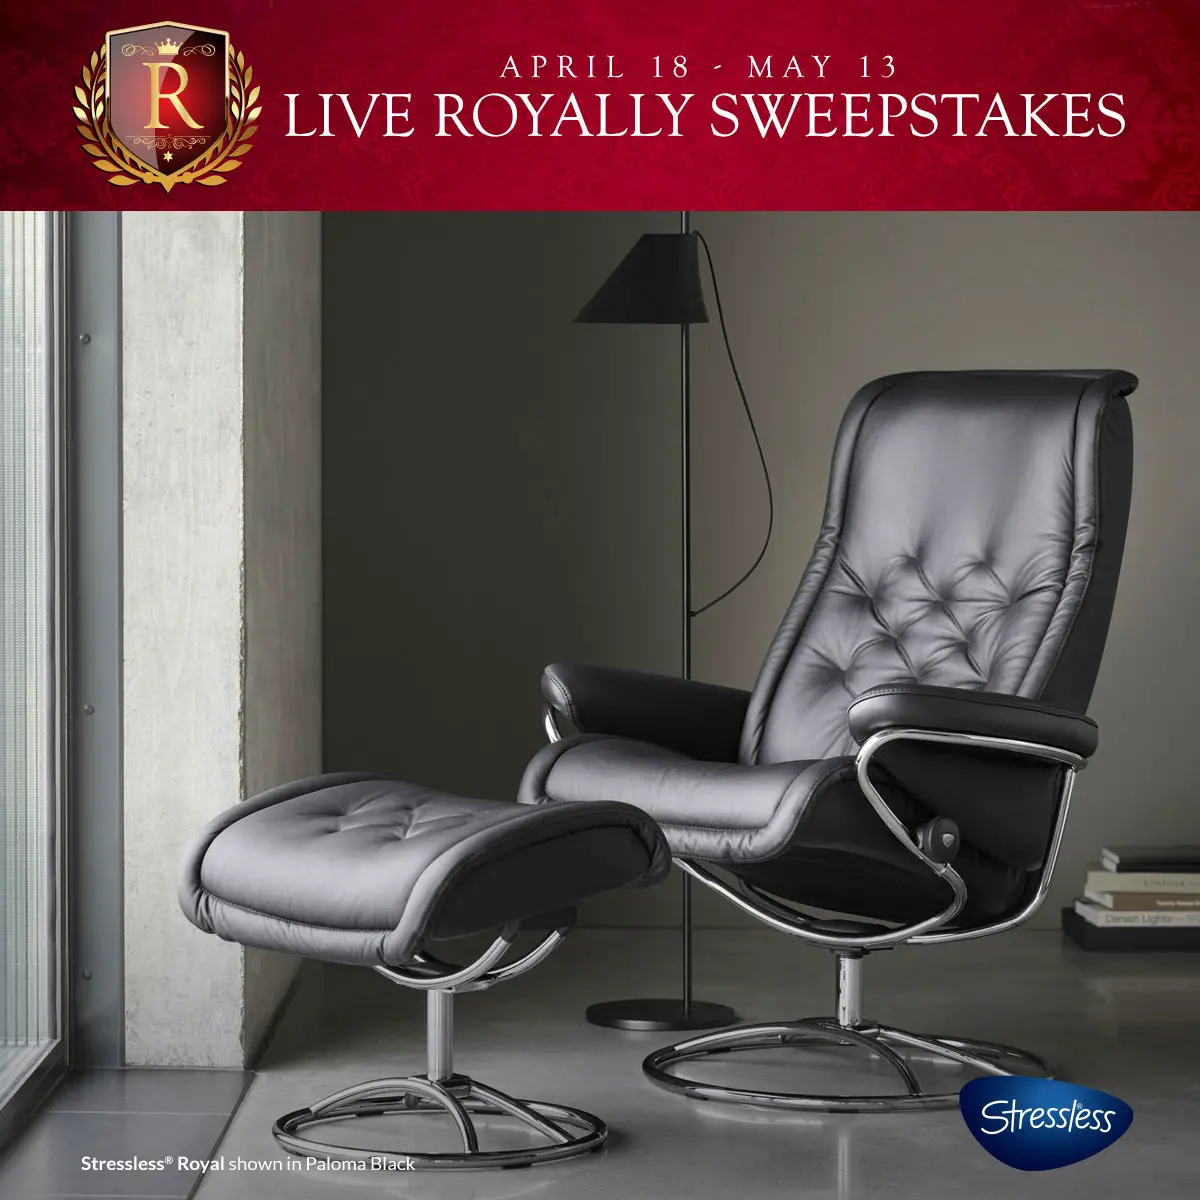 The new Stressless® Royal recliner with the iconic Original base is here, and you could win one for your own home. To enter, comment or upload a photo on this post about which chair you would like to replace using #LiveRoyally or #StresslessSweepstakes.